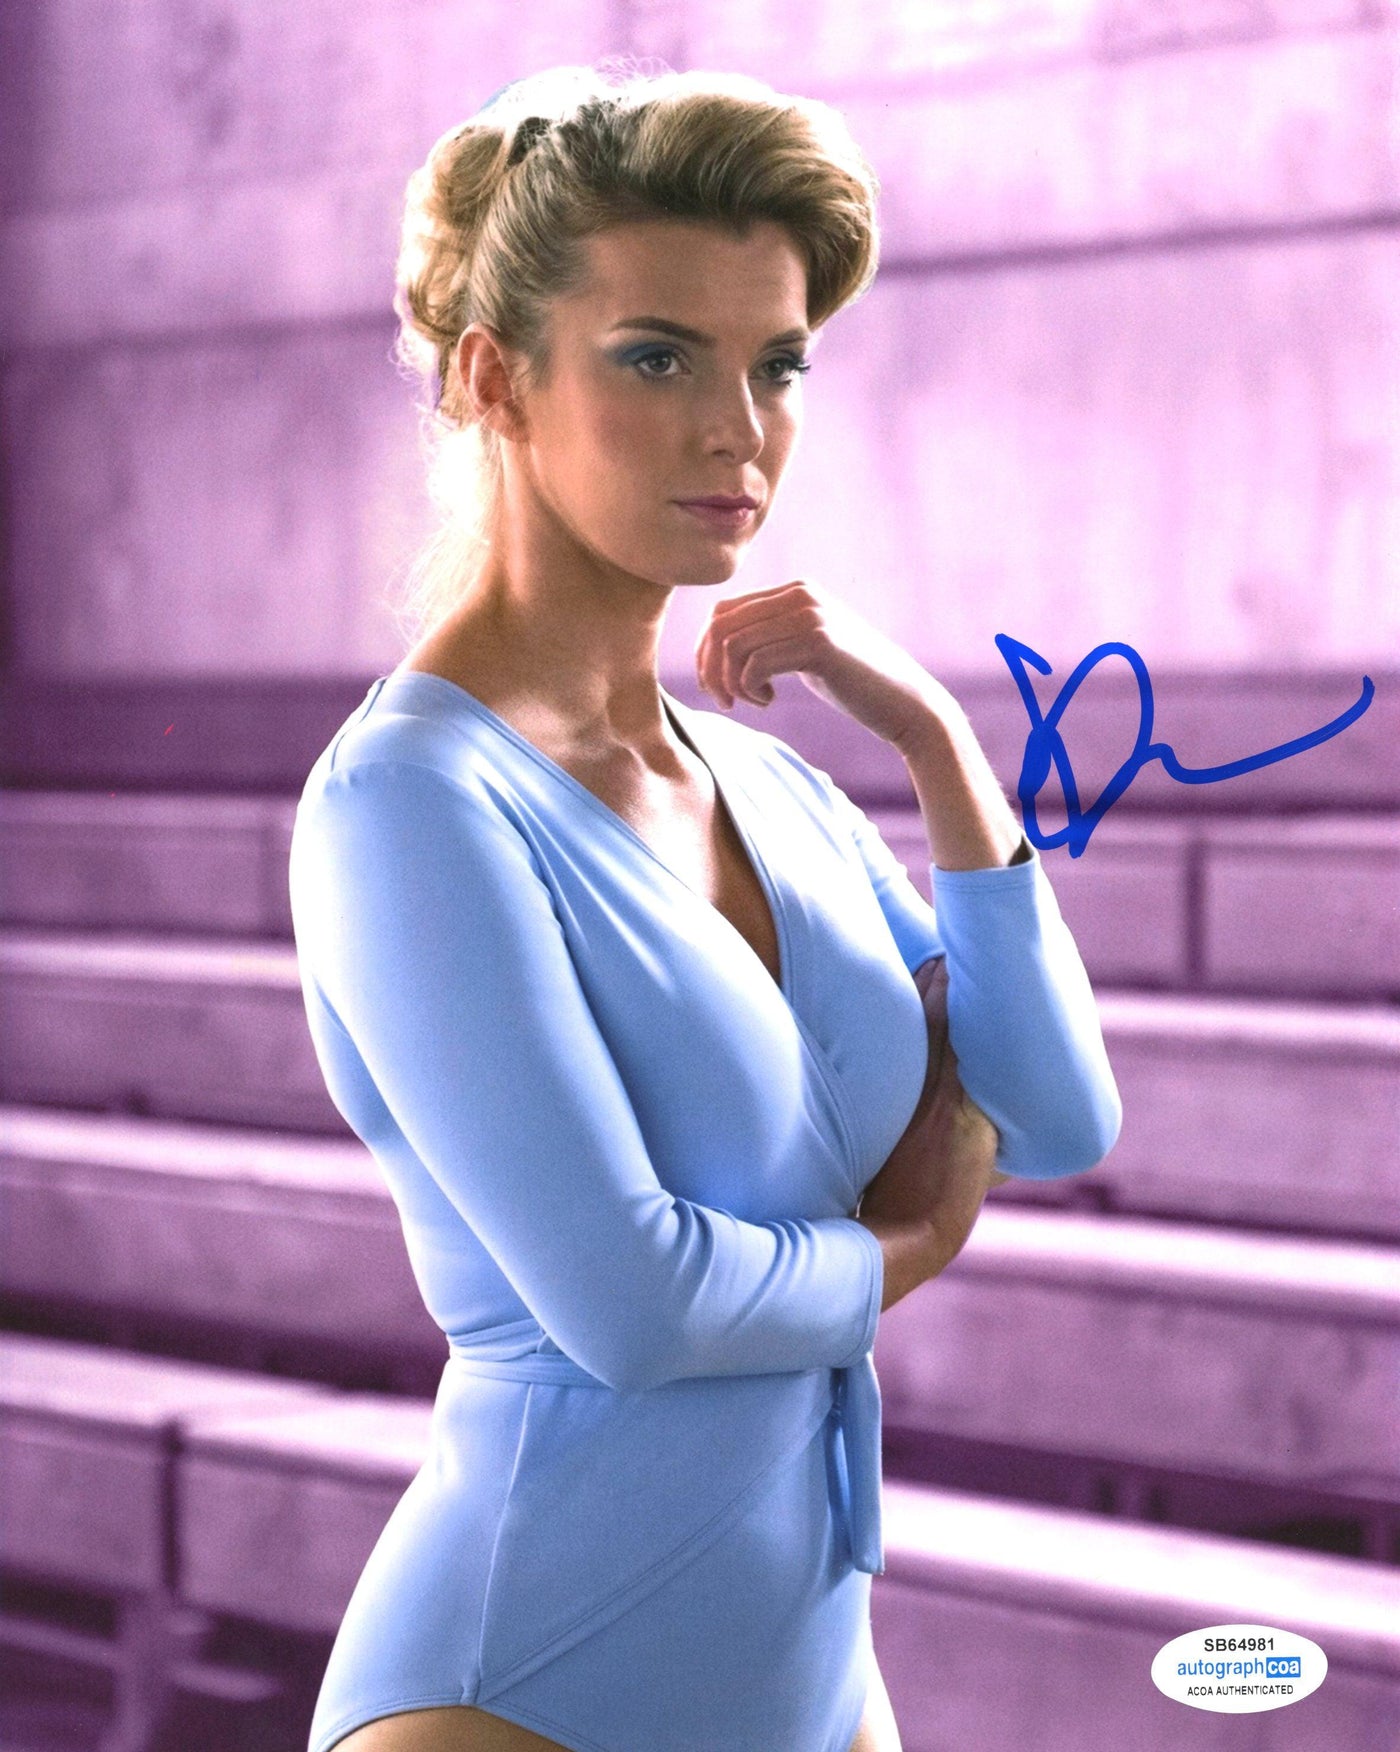 Betty Gilpin Signed 8x10 Photo Glow Debbie Eagan Autographed ACOA #3